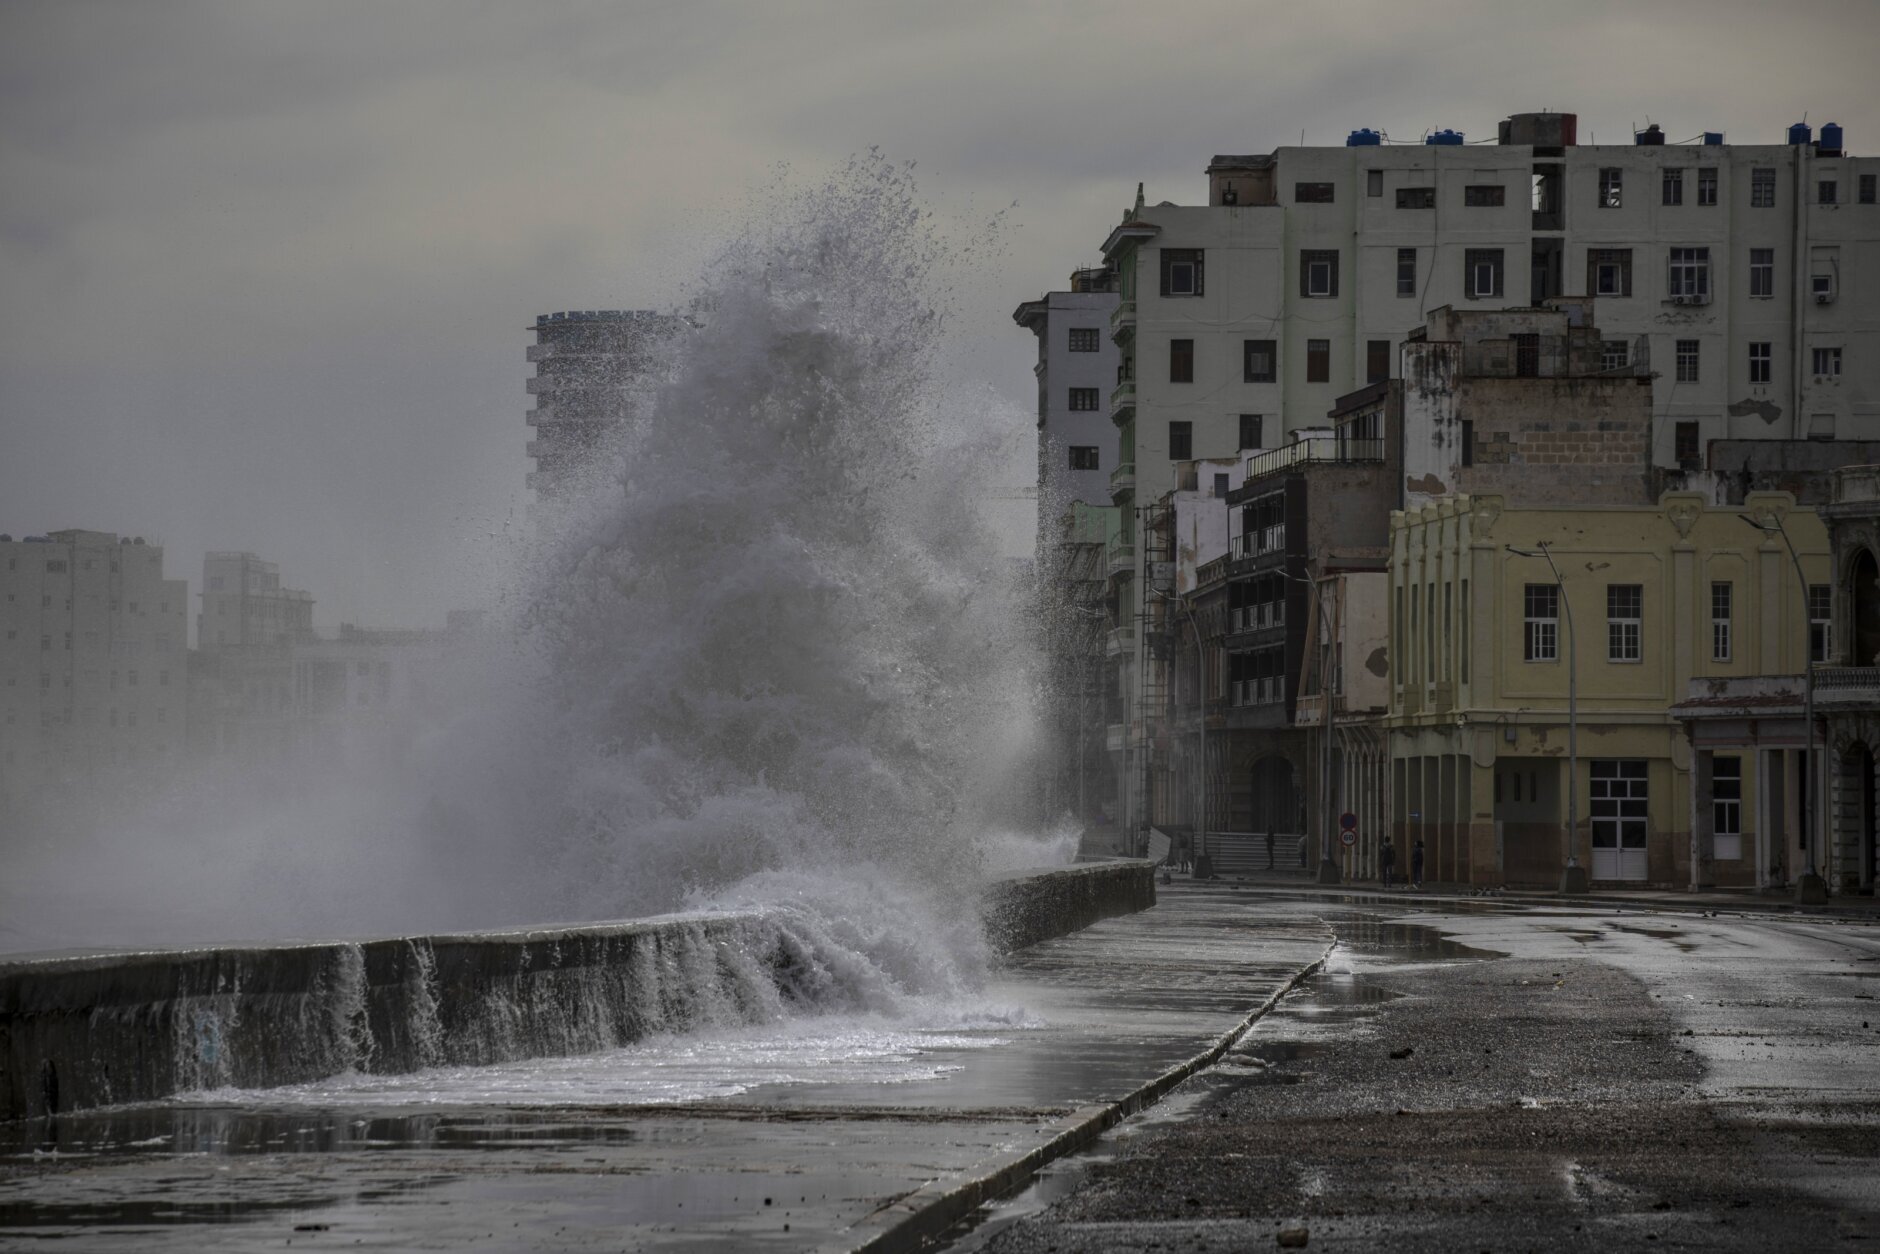 Huge waves crash against a seawall in the wake of Hurricane Ian in Havana, Cuba, Wednesday, Sept. 28, 2022. Cuba remained in the dark early Wednesday after Ian knocked out its power grid and devastated some of the country's most important tobacco farms when it hit the island's western tip as a major storm. (AP Photo/Ramon Espinosa)